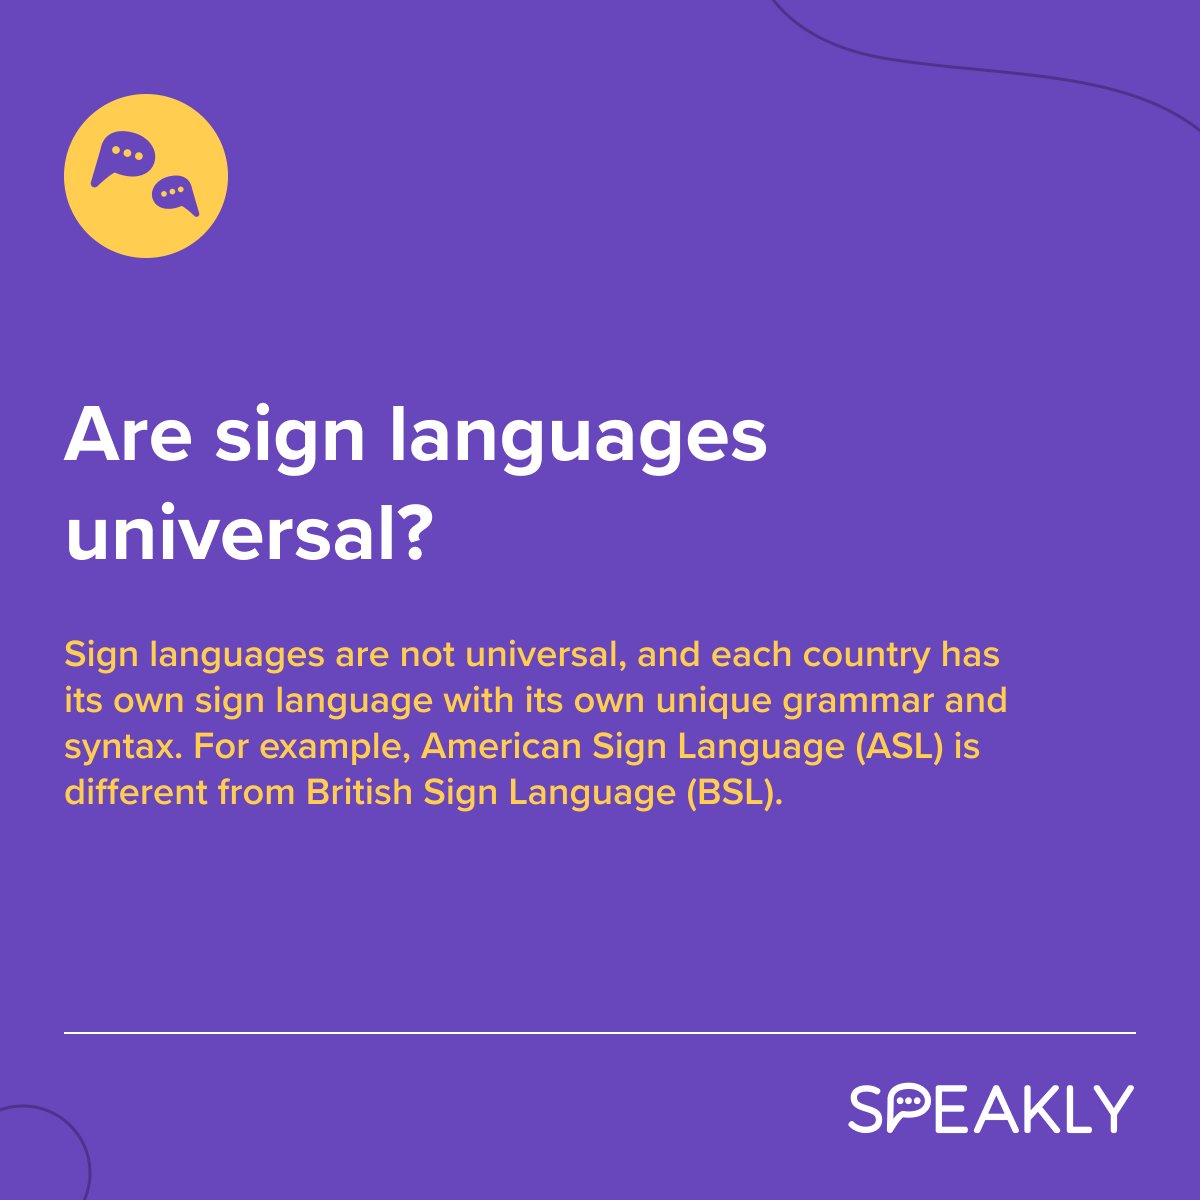 Did you know that sign languages ARE NOT universal?? 😲
Read why it is like this here ⬇️
⠀
#SignLanguages #Linguistics #DeafCulture #LanguageDiversity #LanguageFacts #ASL #BSL #UniversalLanguages #LanguageVariety #LanguageComparison